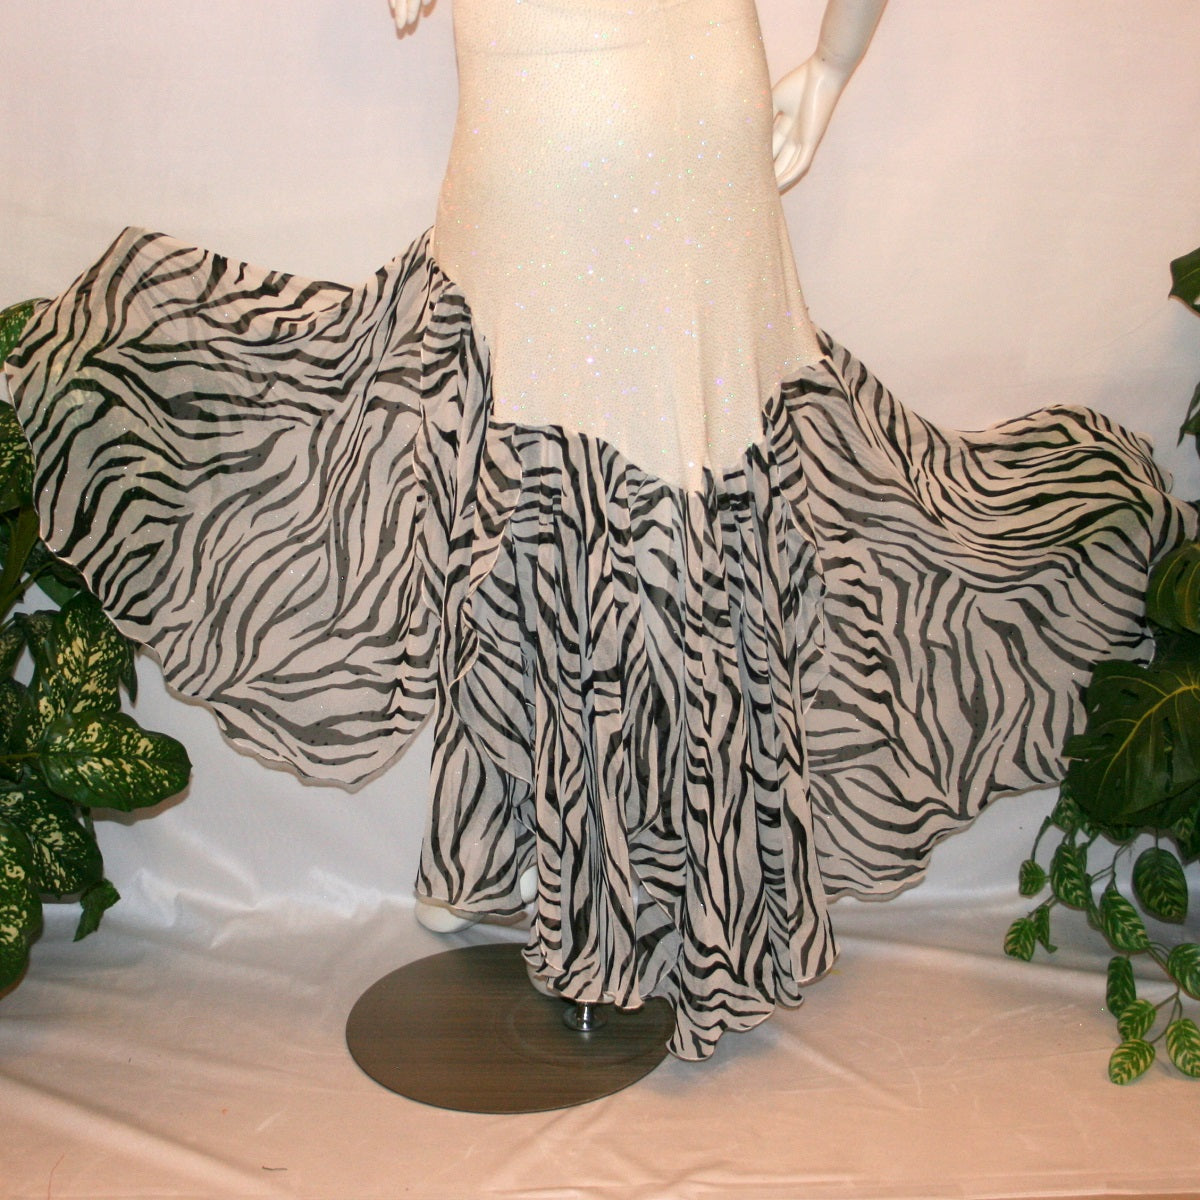 back flaired view of Ballroom style skirt created of white glitter slinky with yards of zebra print flowing panels will work great to create a converta ballroom dress